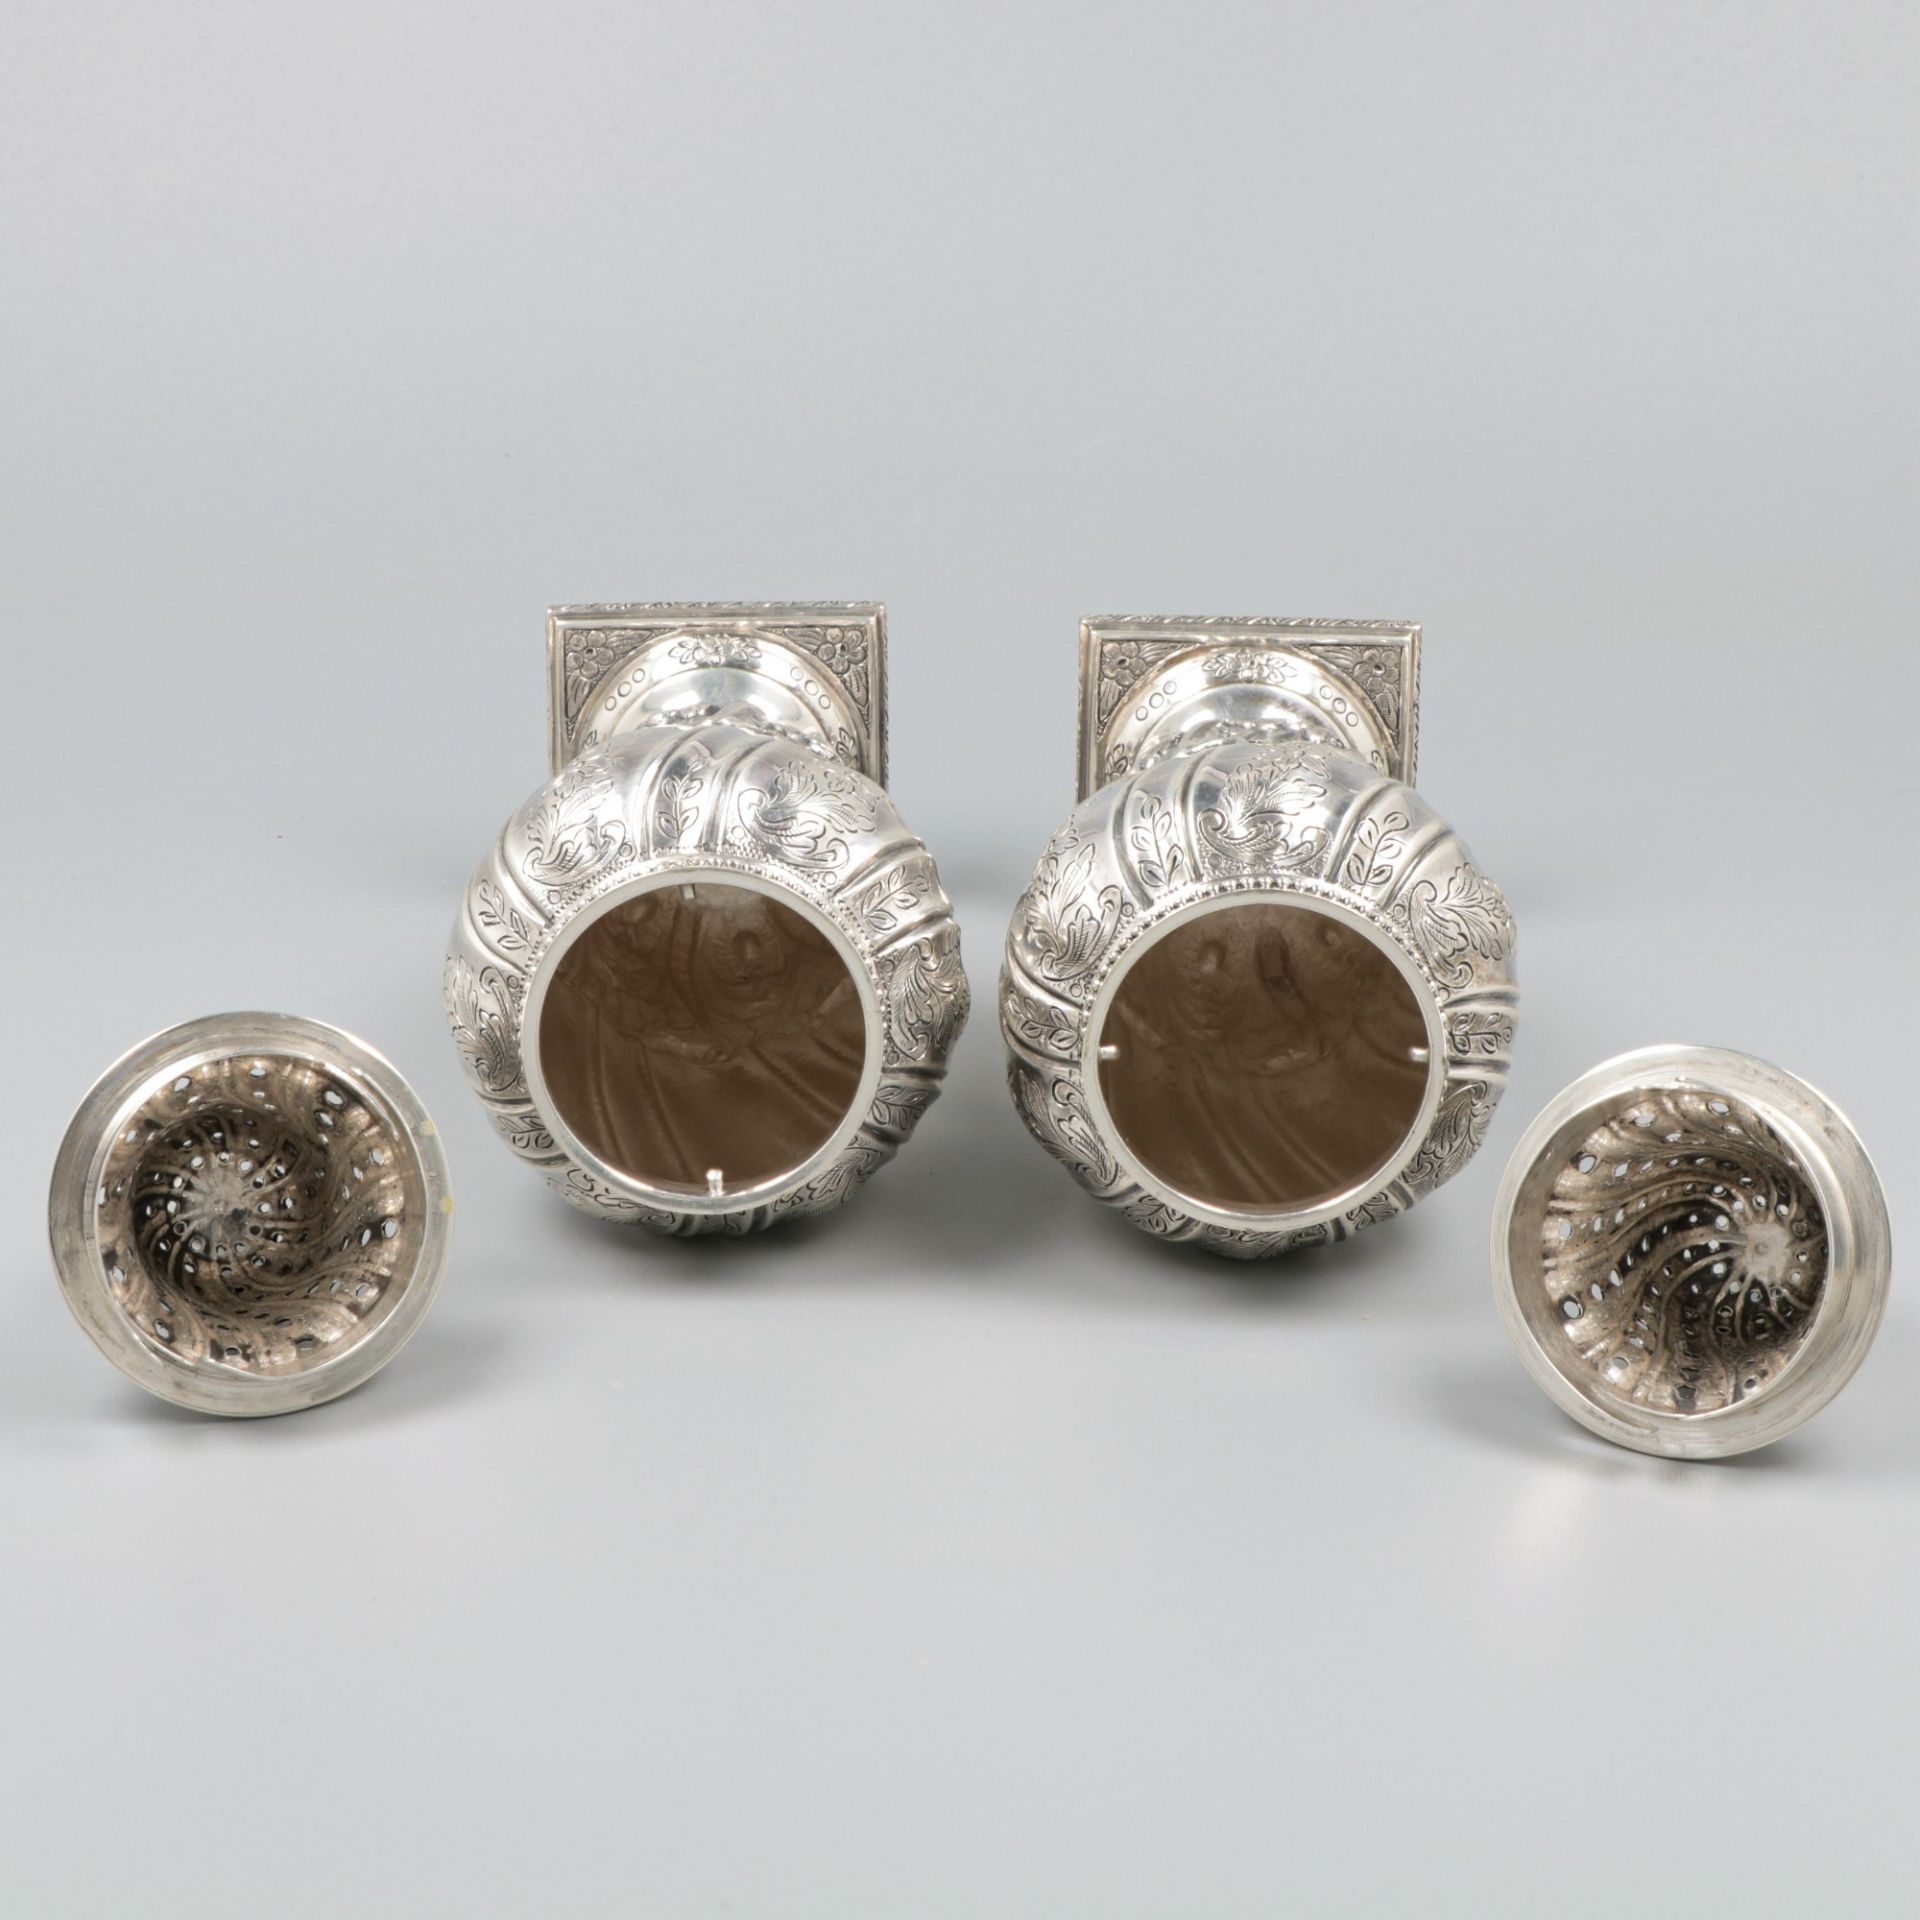 2-piece set of silver casters. - Image 5 of 7